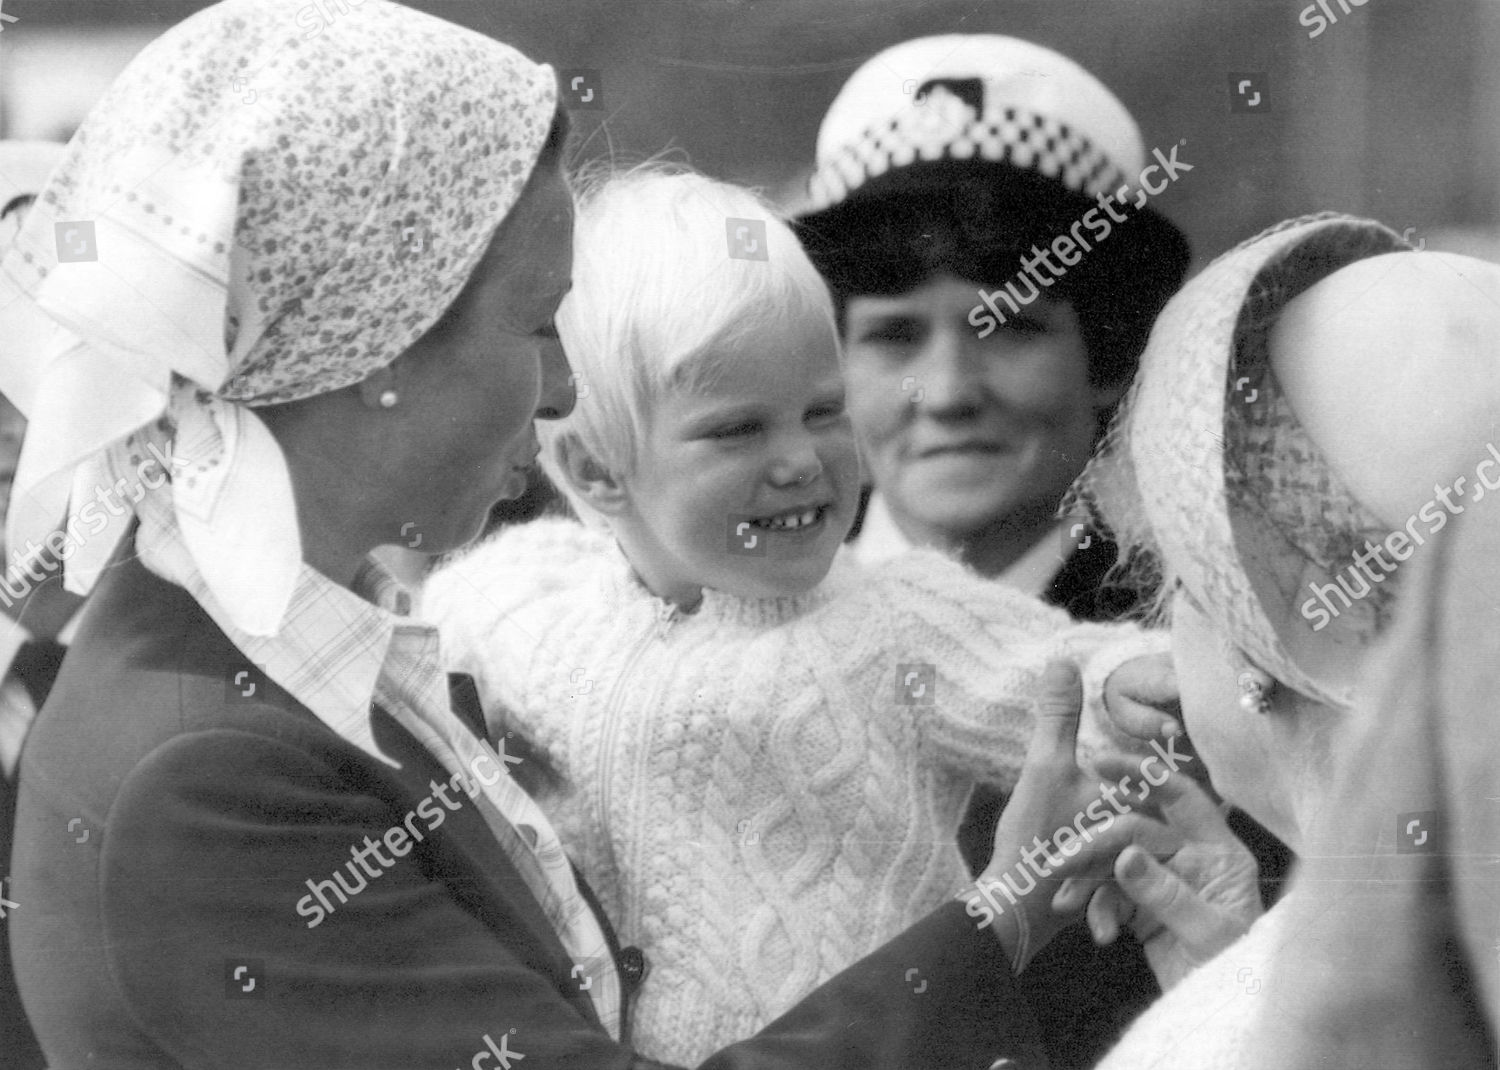 zara-phillips-15th-august-1983-smiling-zara-reaches-out-to-touch-the-queen-mothers-nose-princessanne-and-her-daughter-zara-are-greeted-by-the-queen-mother-royalty-shutterstock-editorial-930375a.jpg